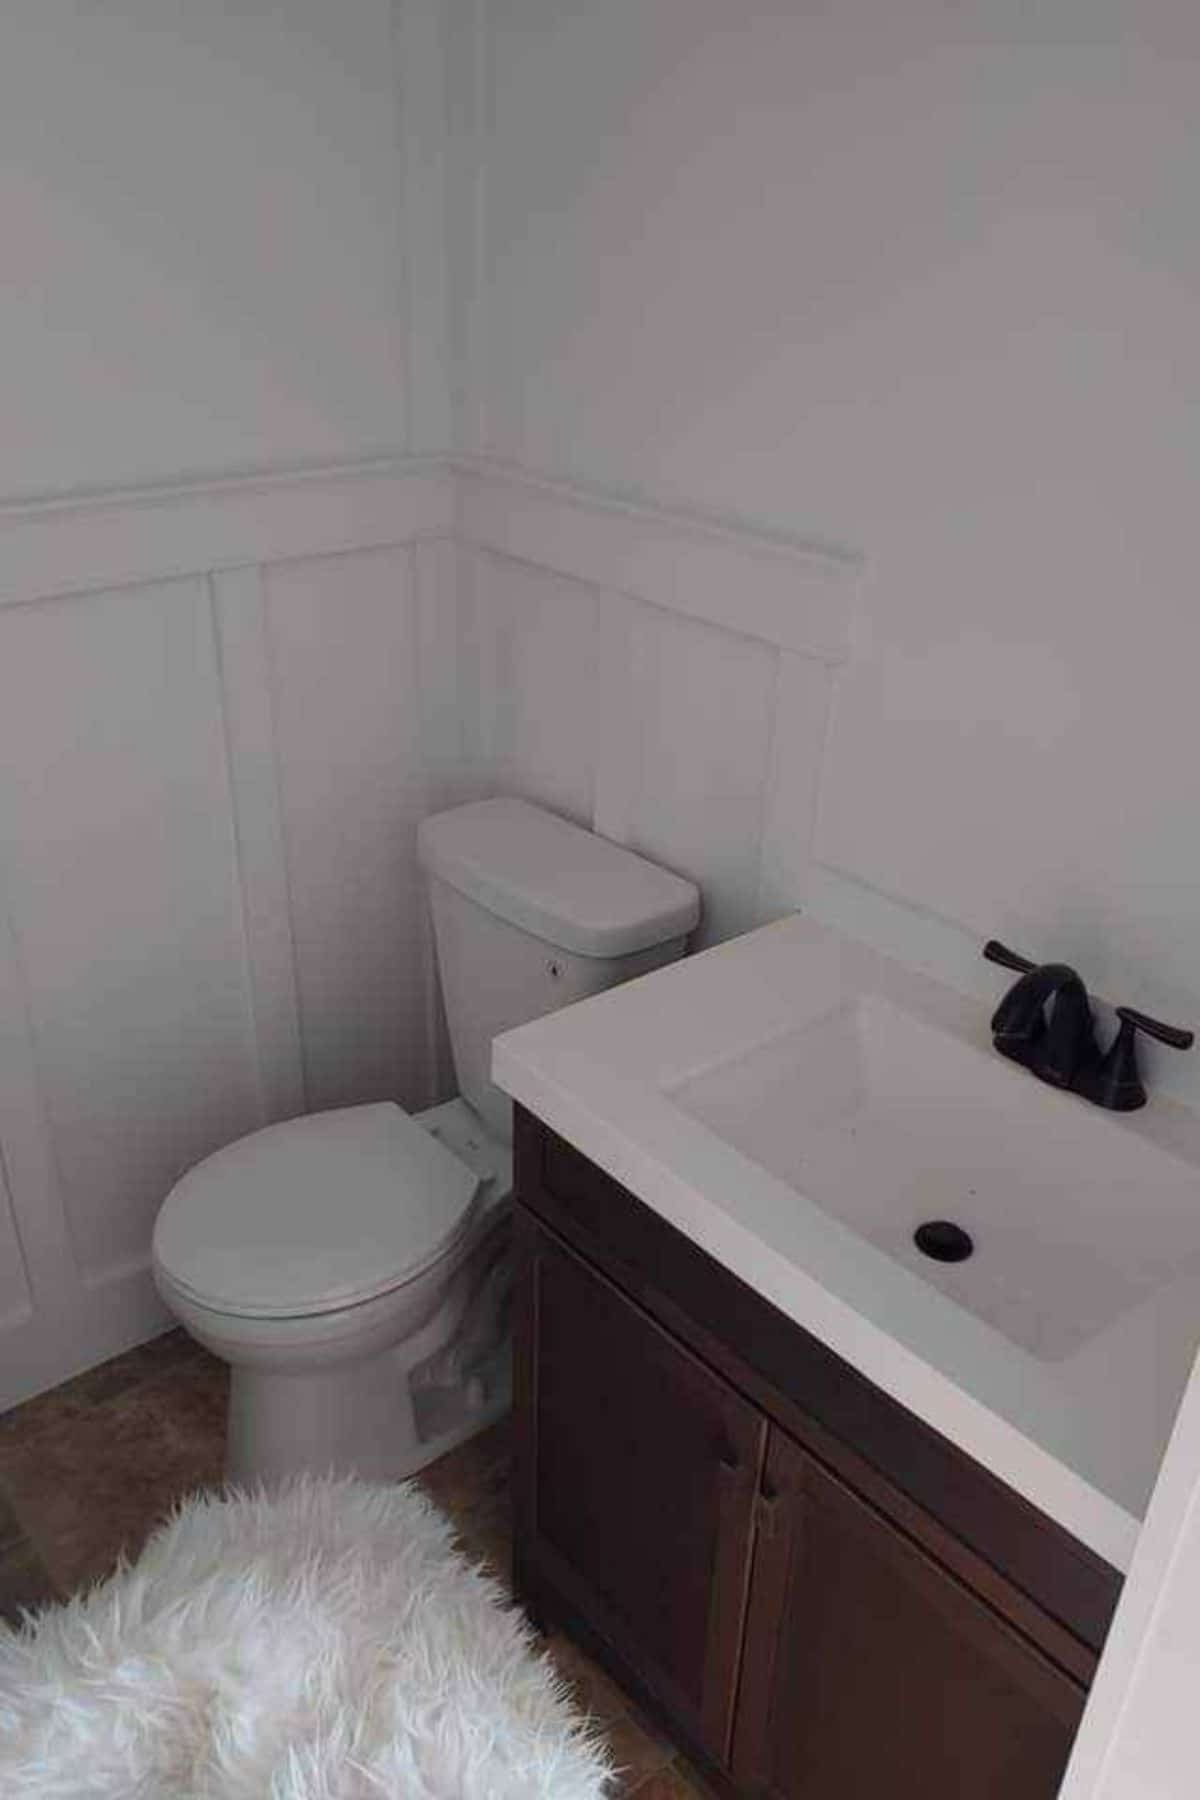 flush toilet next to brown cabinet with white sink and countertop